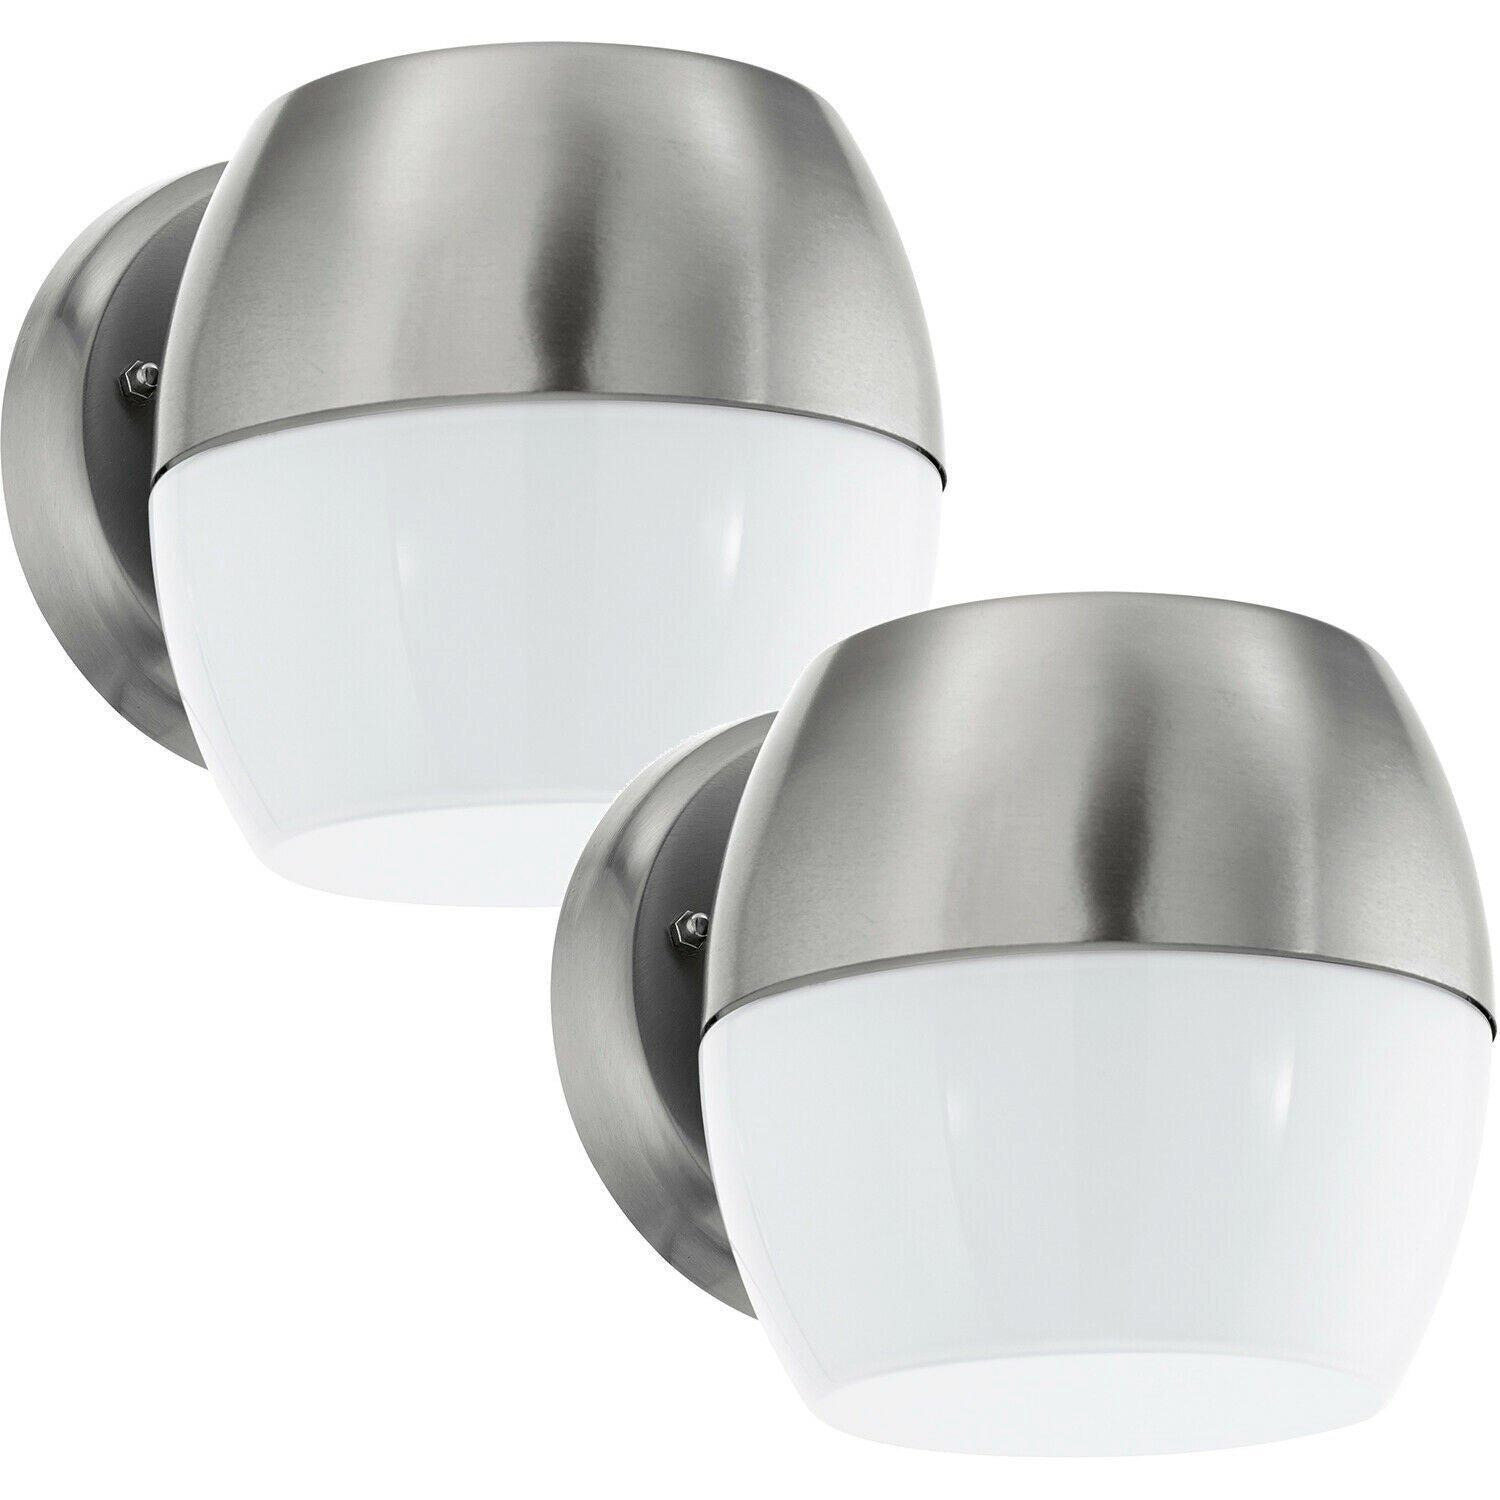 2 PACK IP44 Outdoor Wall Light Stainless Steel 11W Built in LED Porch Lamp - image 1